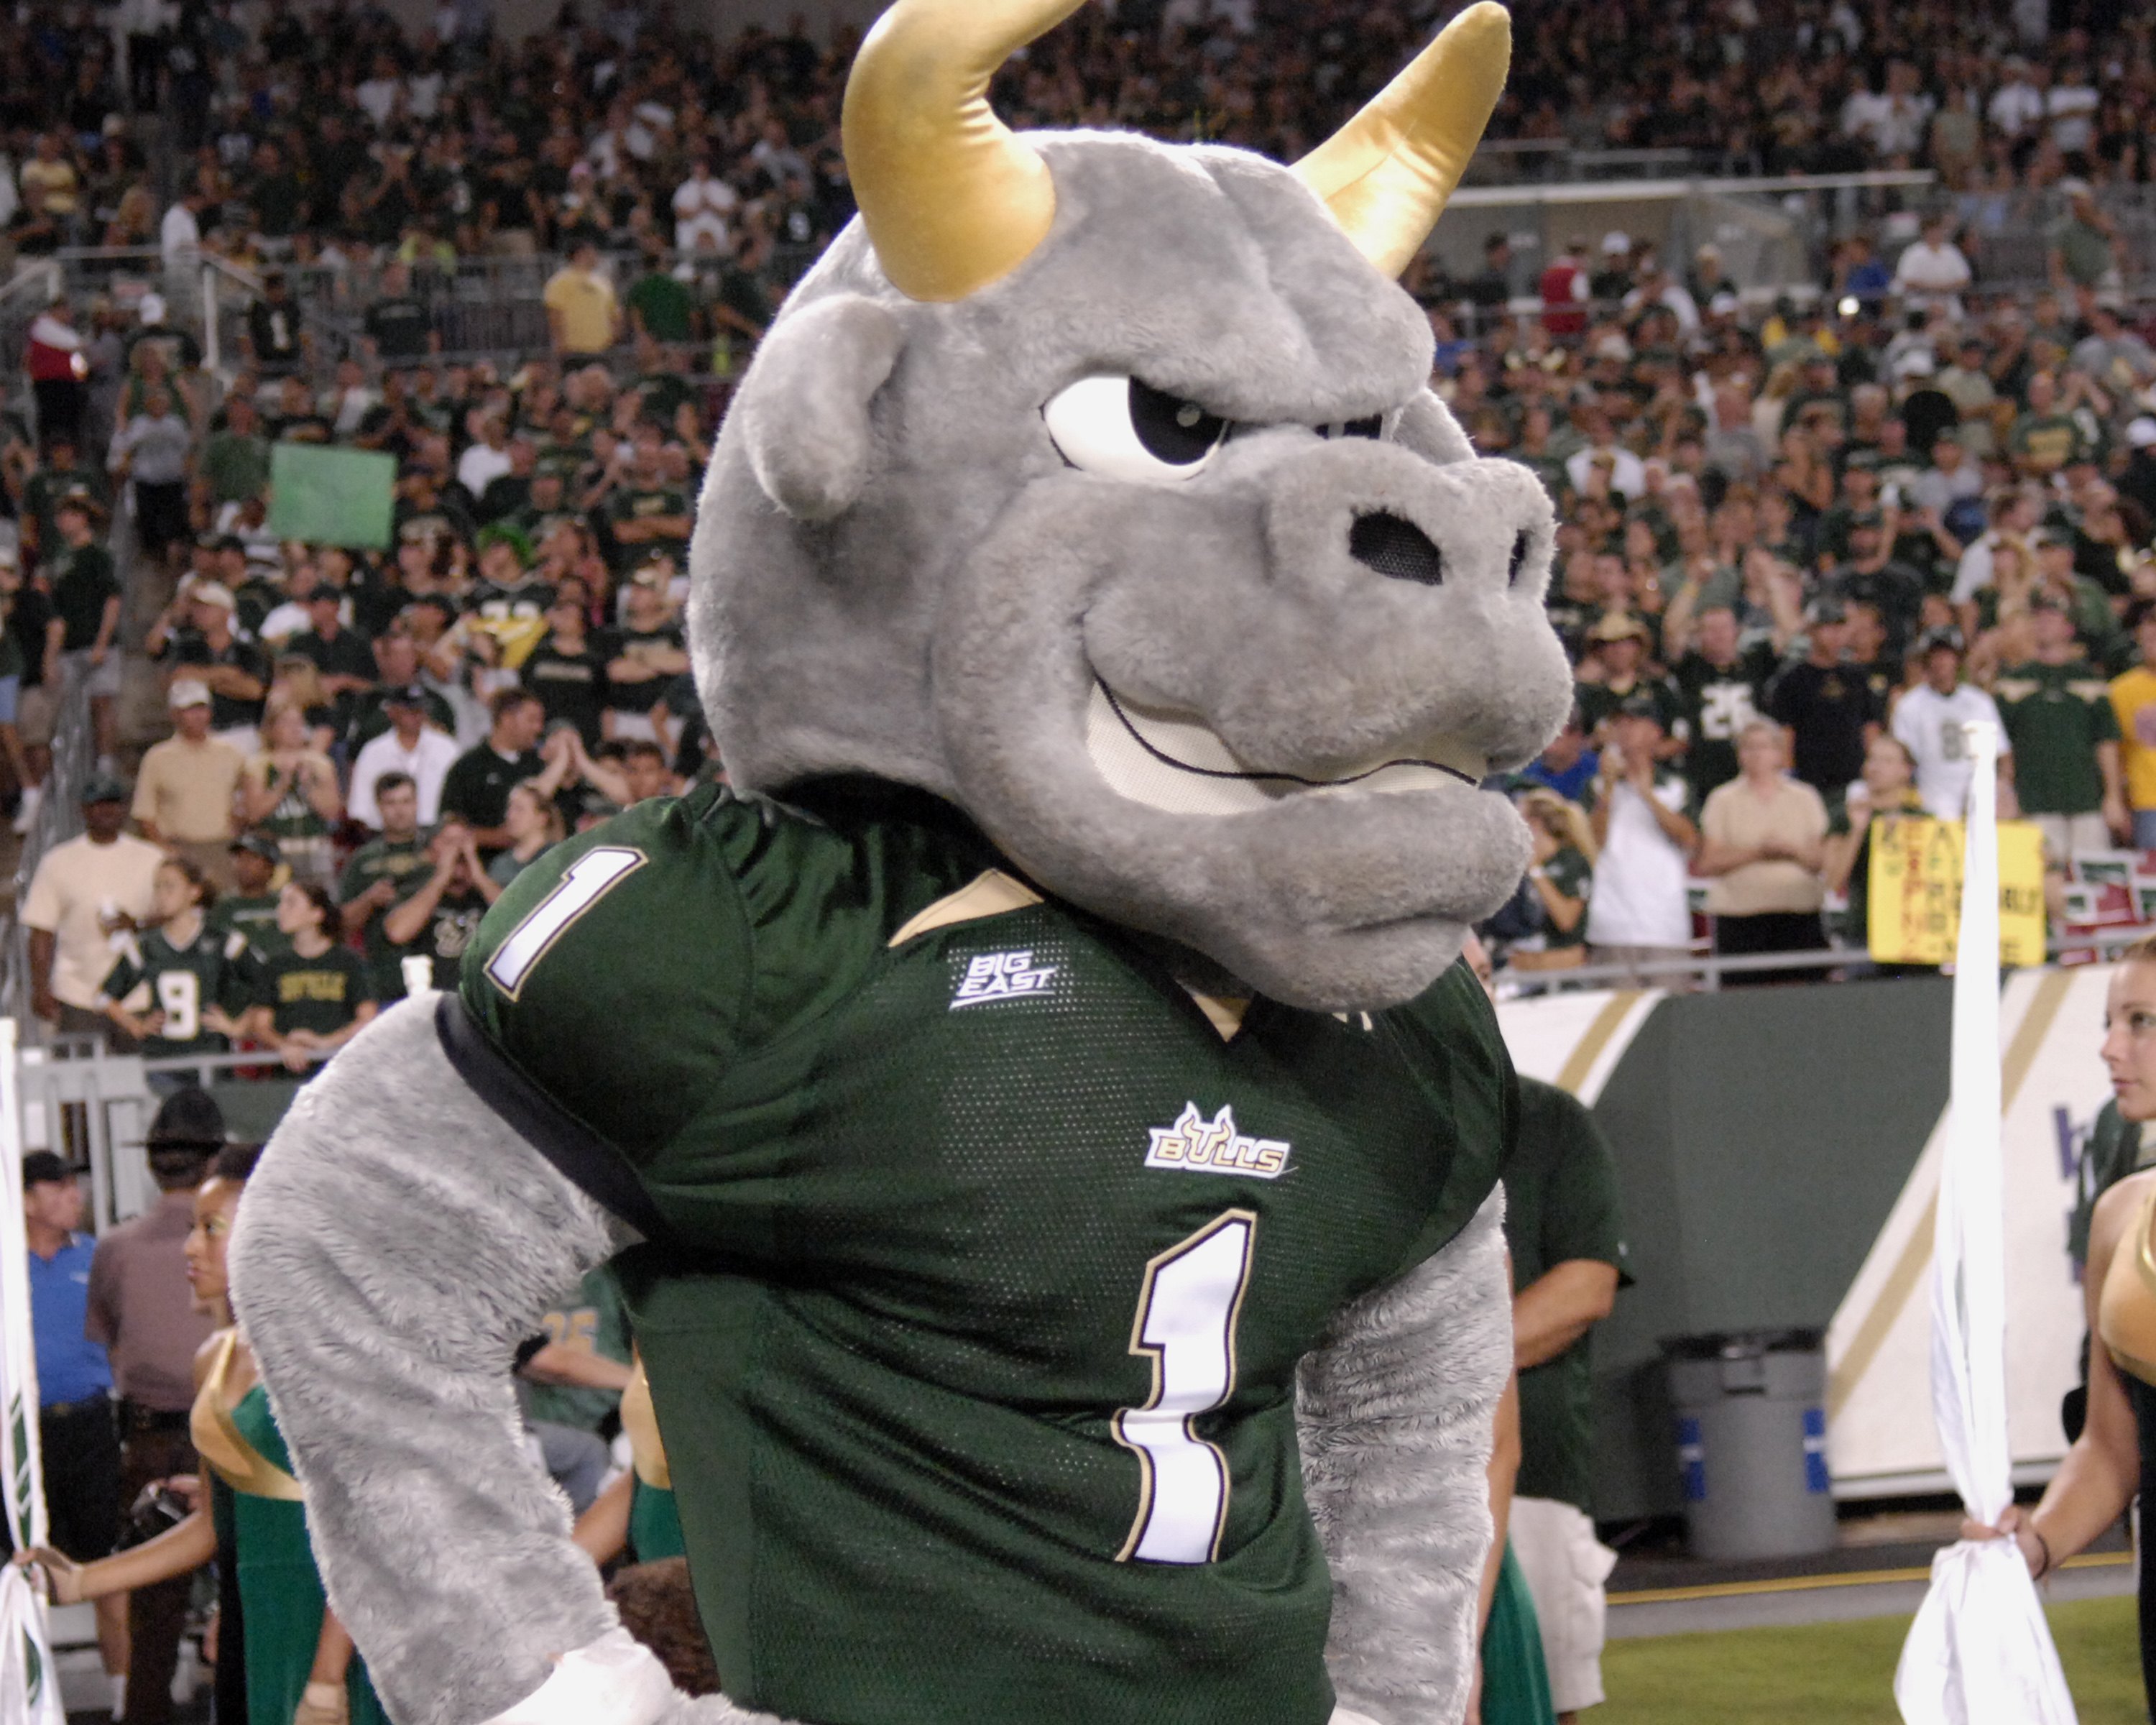 TAMPA, FL - SEPTEMBER 12: The mascot of the University of South Florida Bulls cheer play against the Kansas University Jayhawks at Raymond James Stadium on September 12, 2008 in Tampa, Florida.  (Photo by Al Messerschmidt/Getty Images)